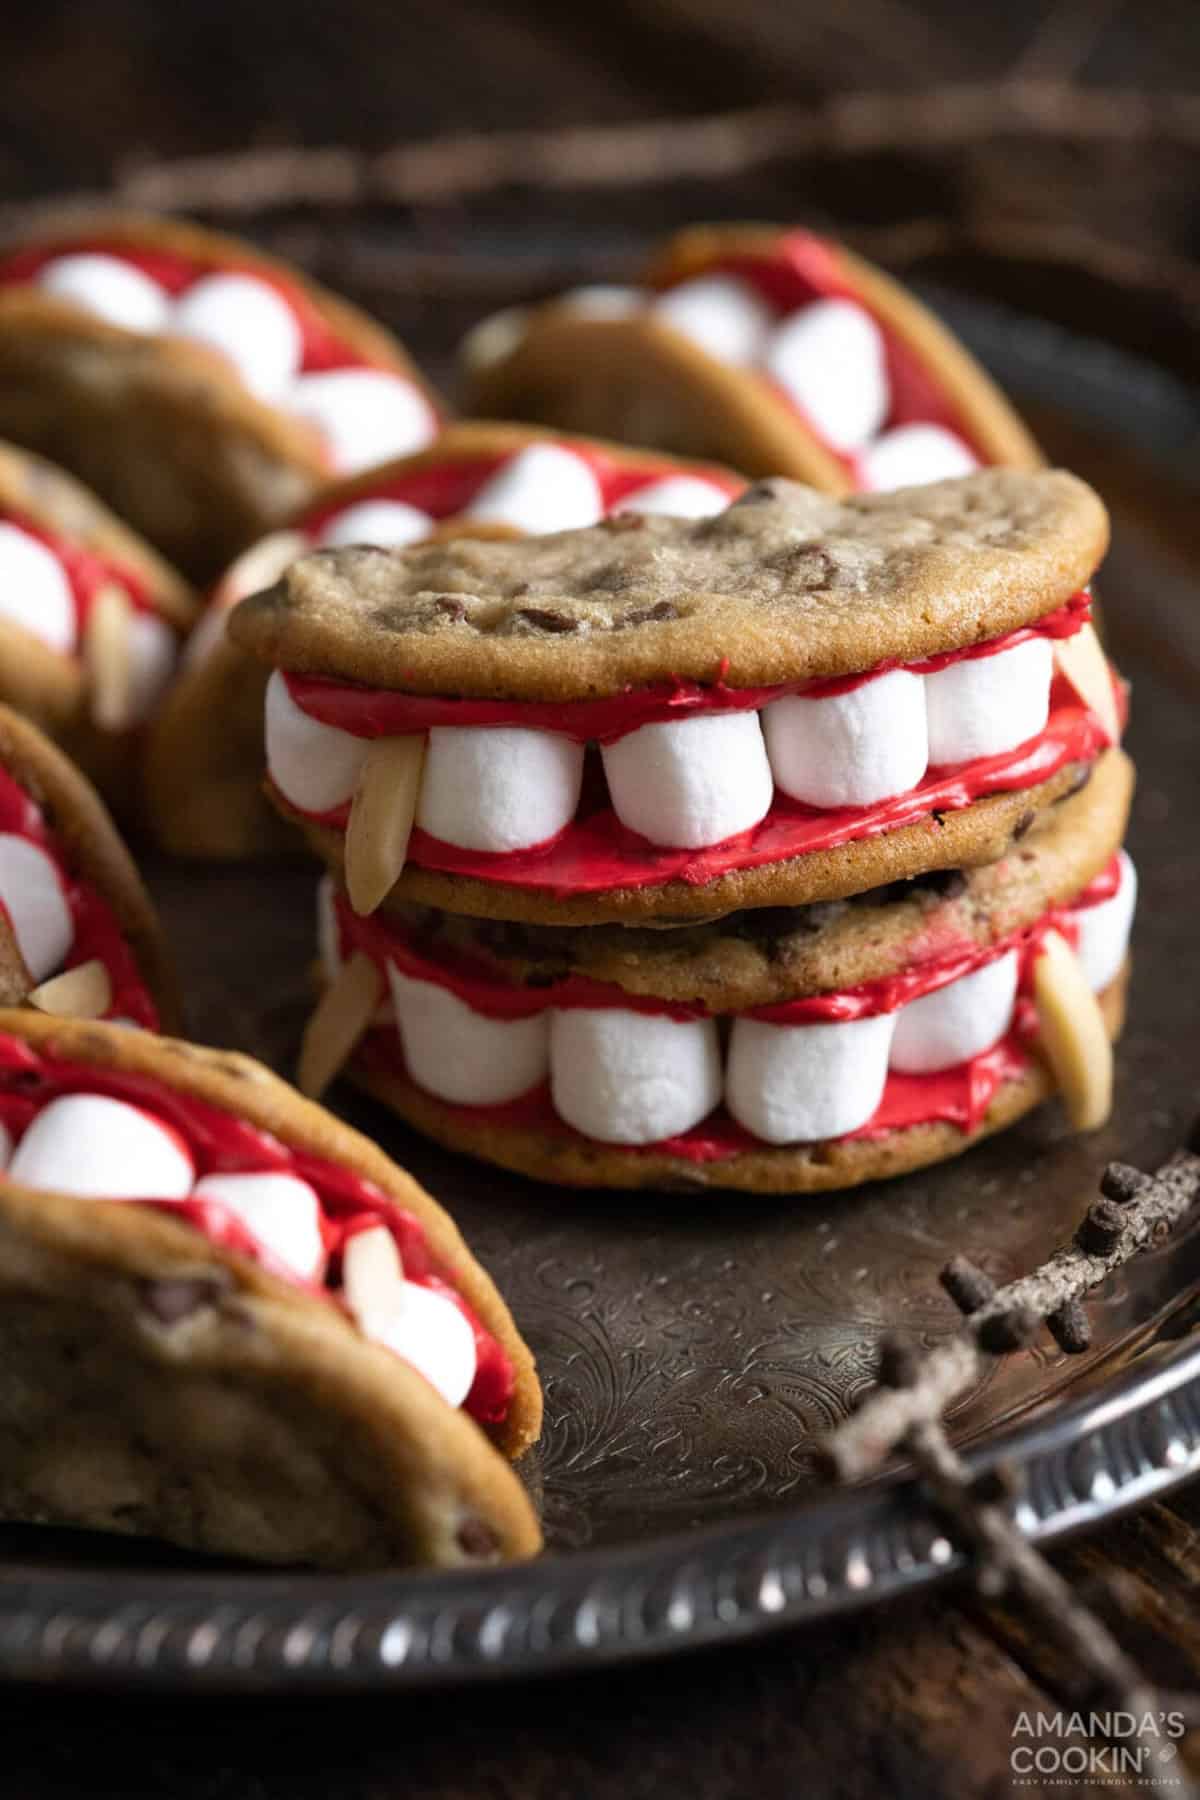 cookies with marshmallows, red frosting, and silvered almonds that looks like vampire mouth